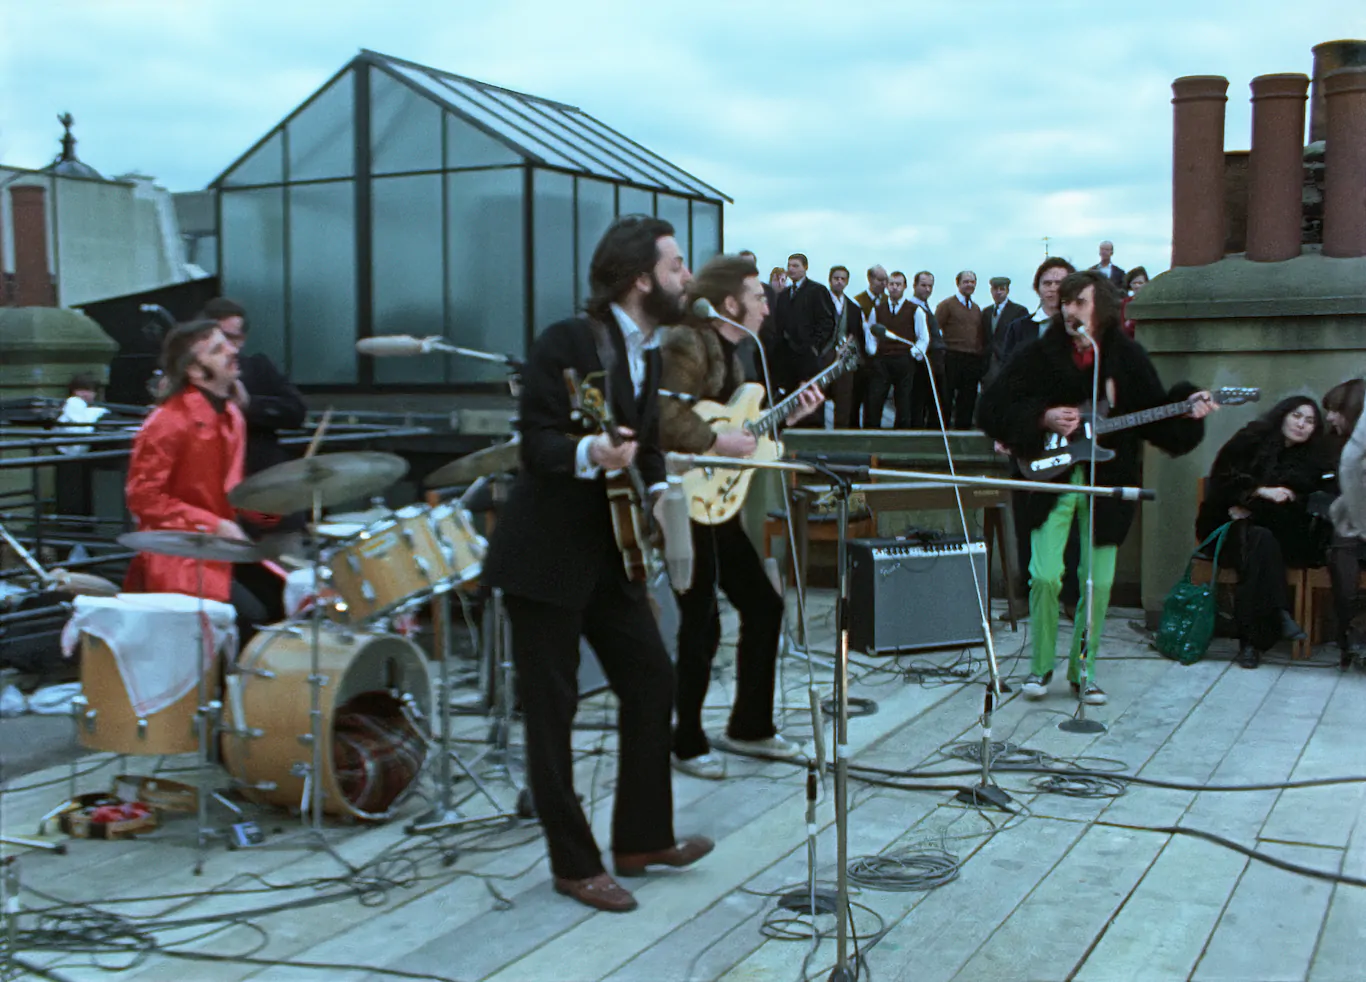 THE BEATLES’ legendary rooftop concert from Peter Jackson’s “The Beatles: Get Back” to make theatrical debut exclusively in Imax